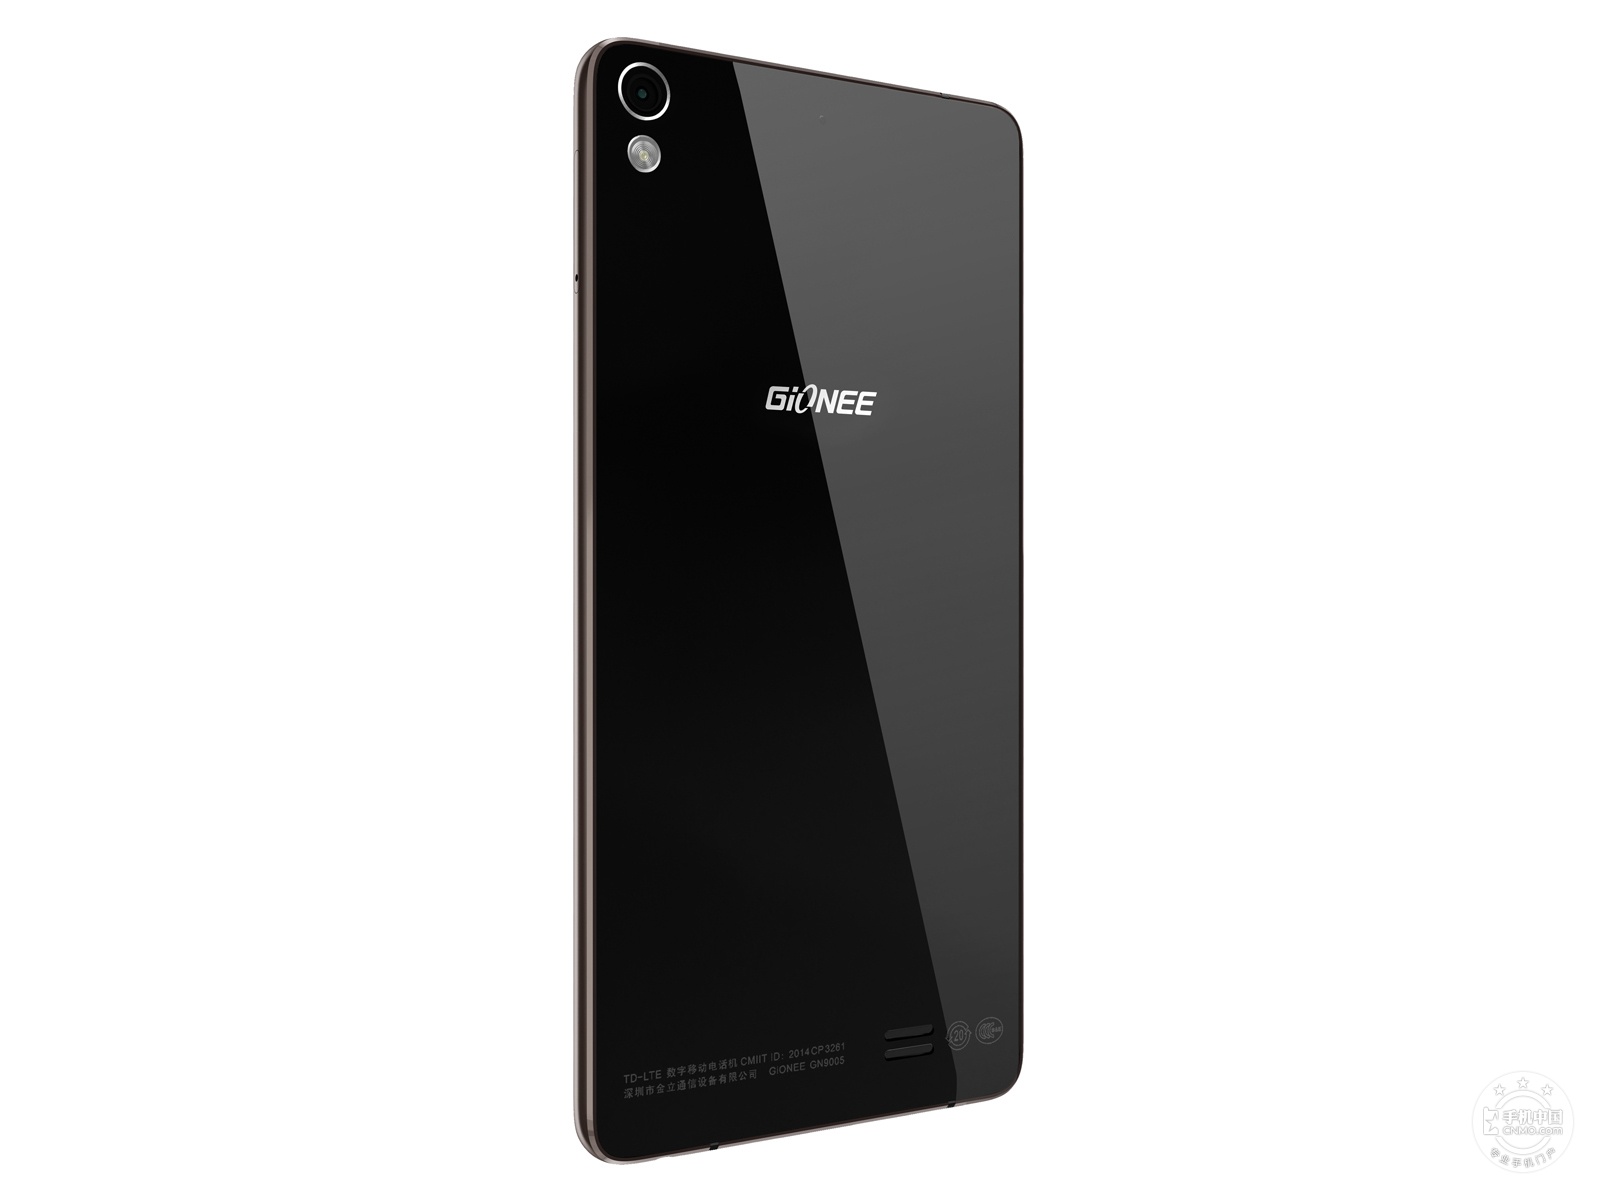 Gionee-Elife-S5.1-13